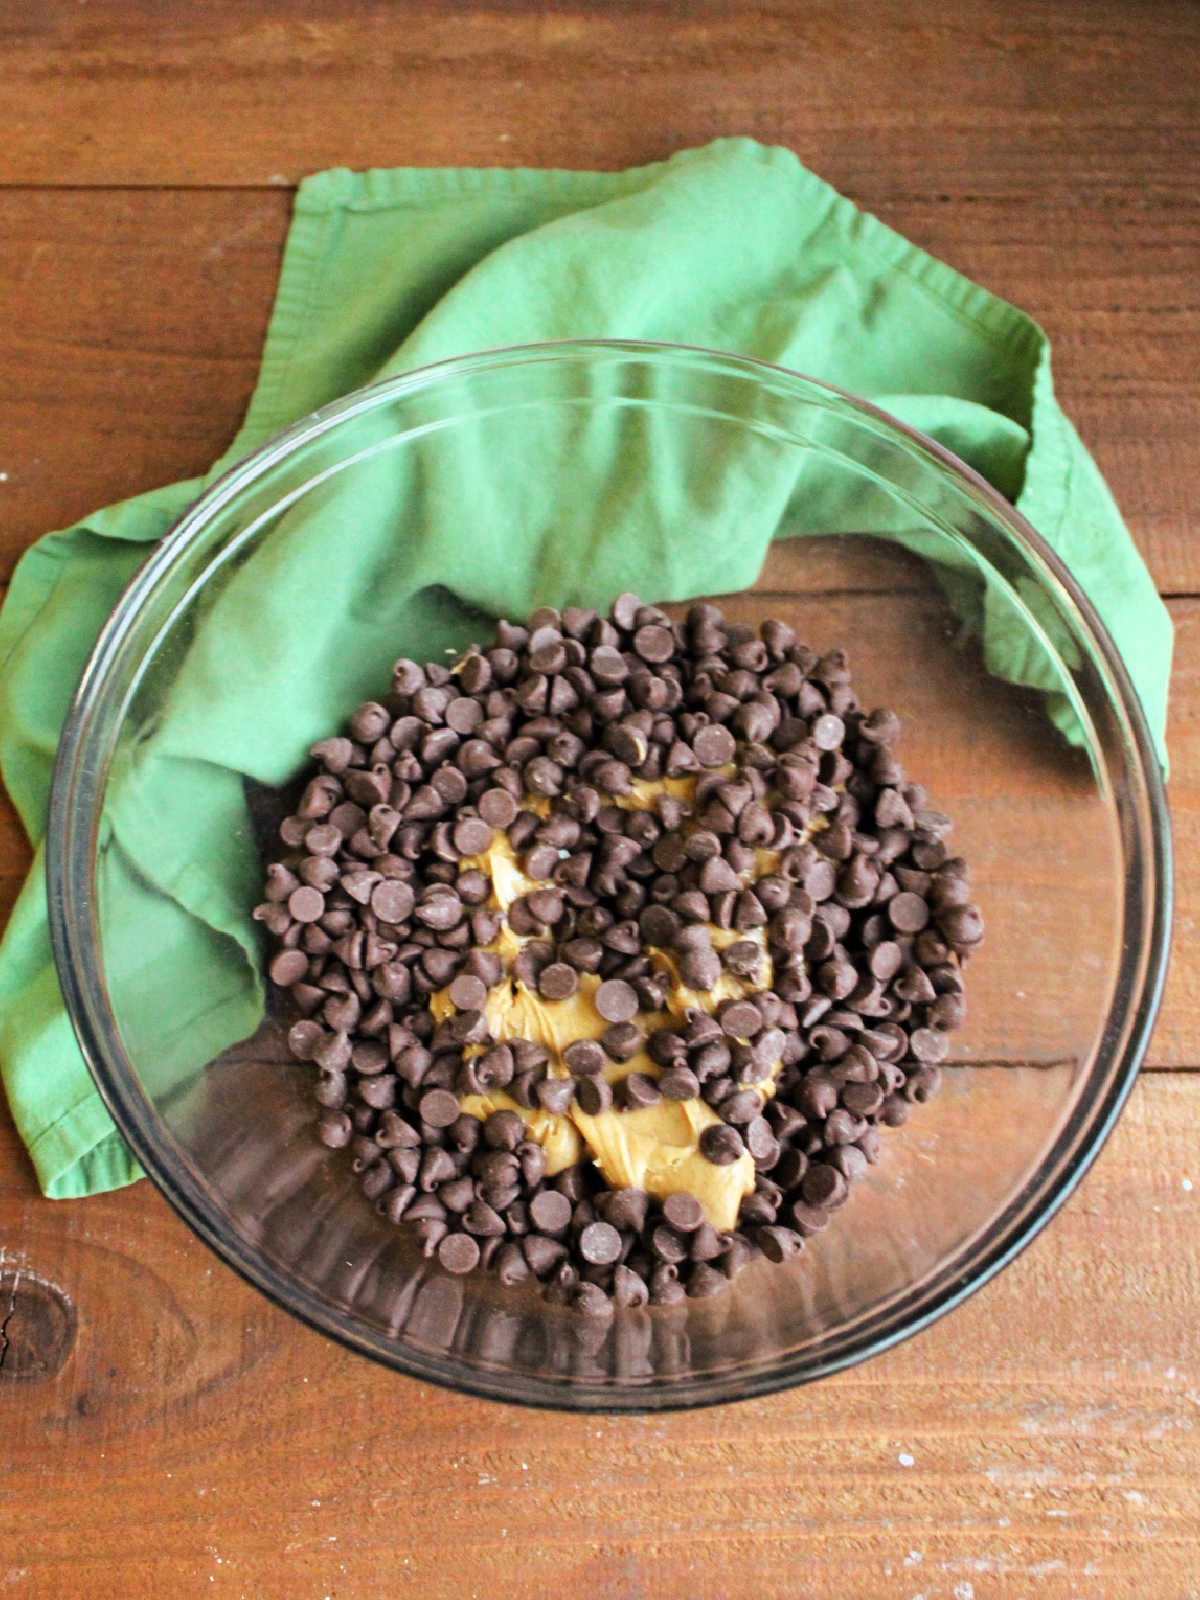 Large glass mixing bowl with creamy peanut butter and chocolate chips inside.